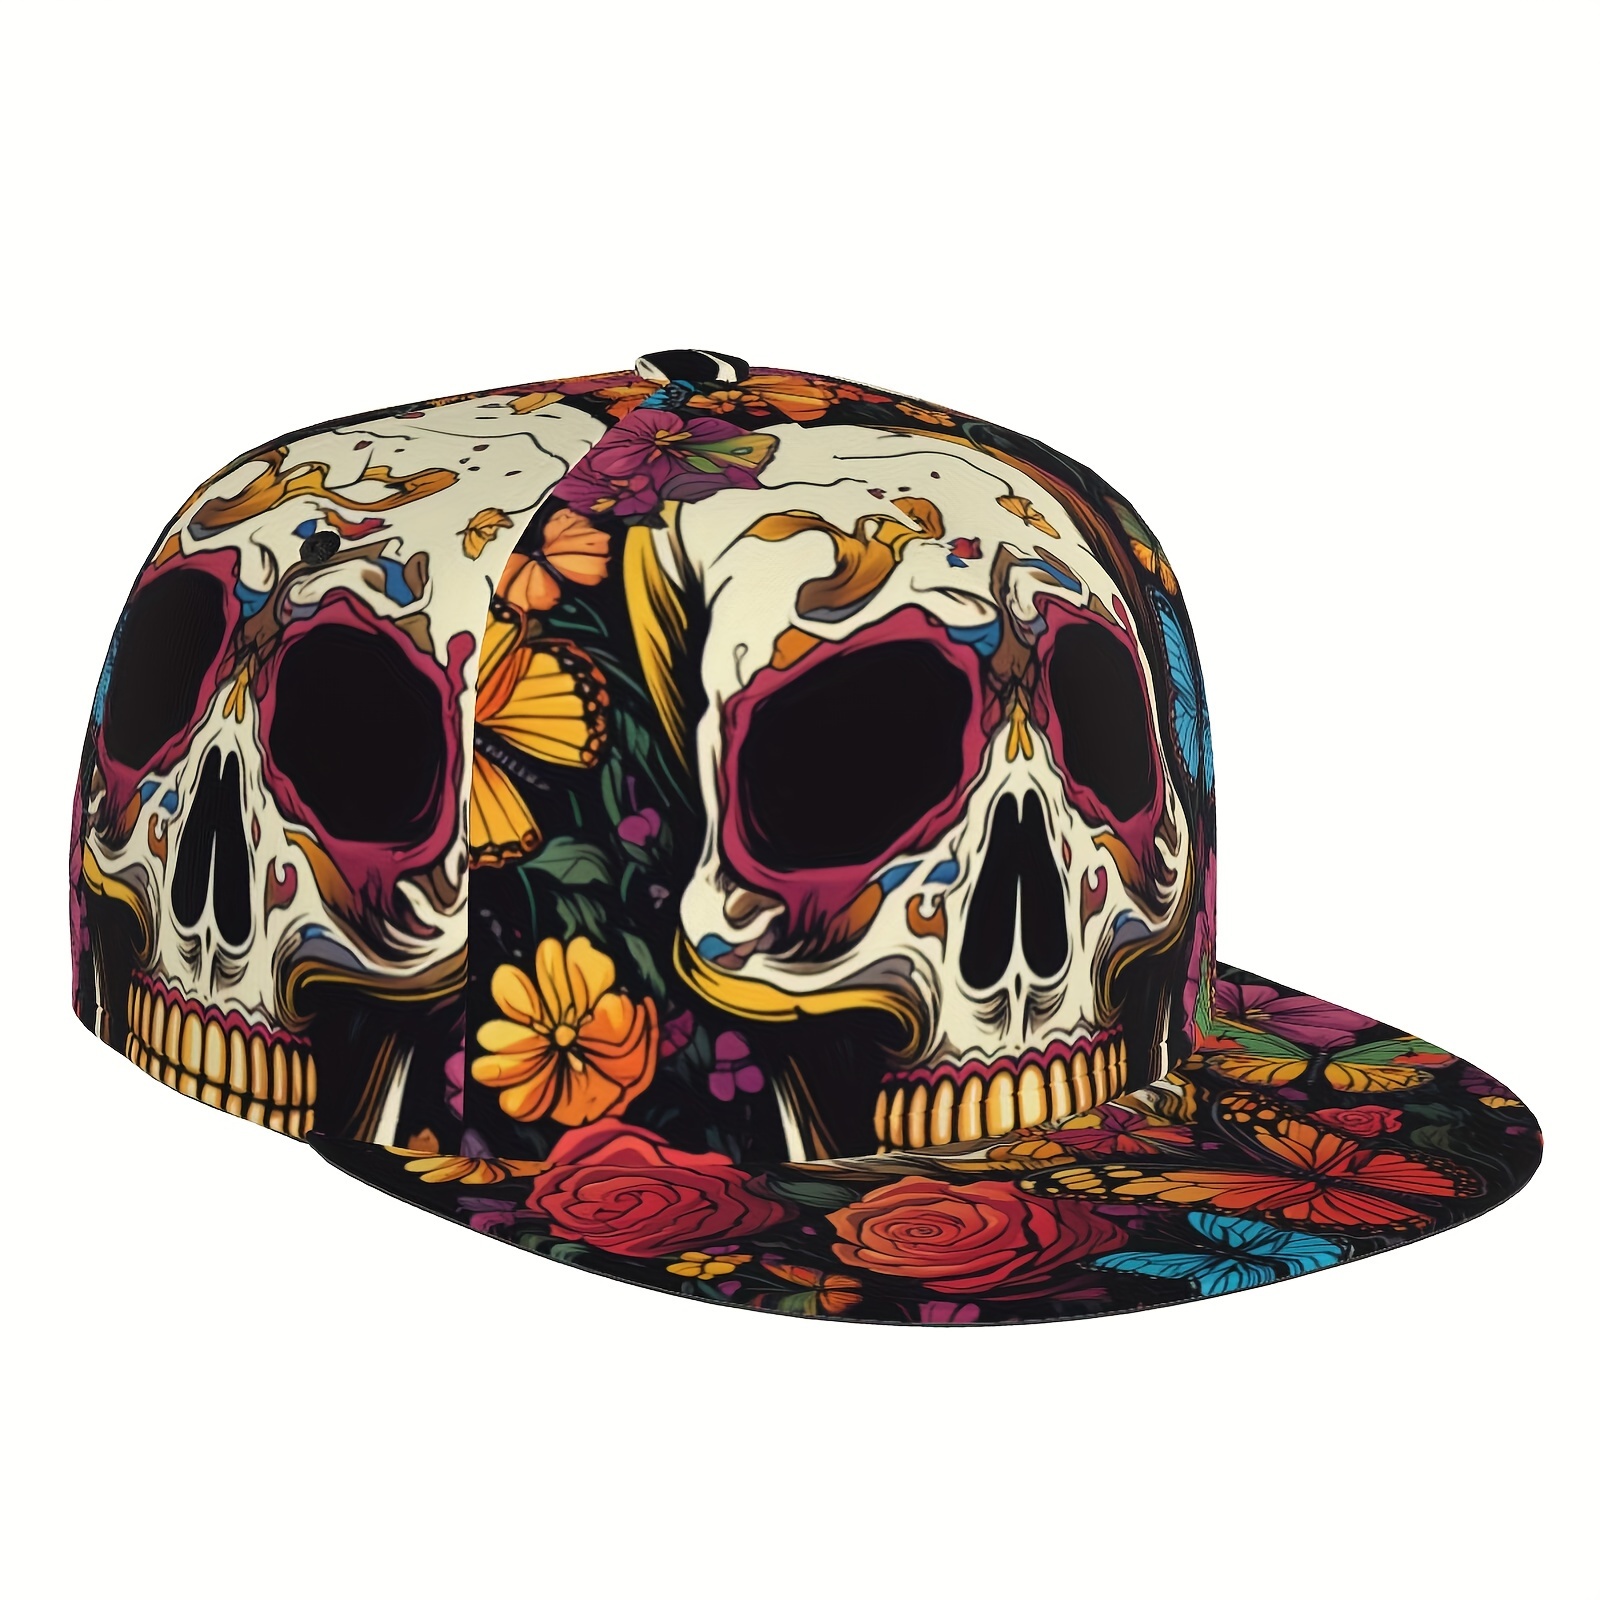 

Punk Gothic Cool Flat Brim Baseball Cap, Colorful Flower & Skull Print Trucker Hat, Hippie Snapback Hat For Casual Leisure Outdoor Sports